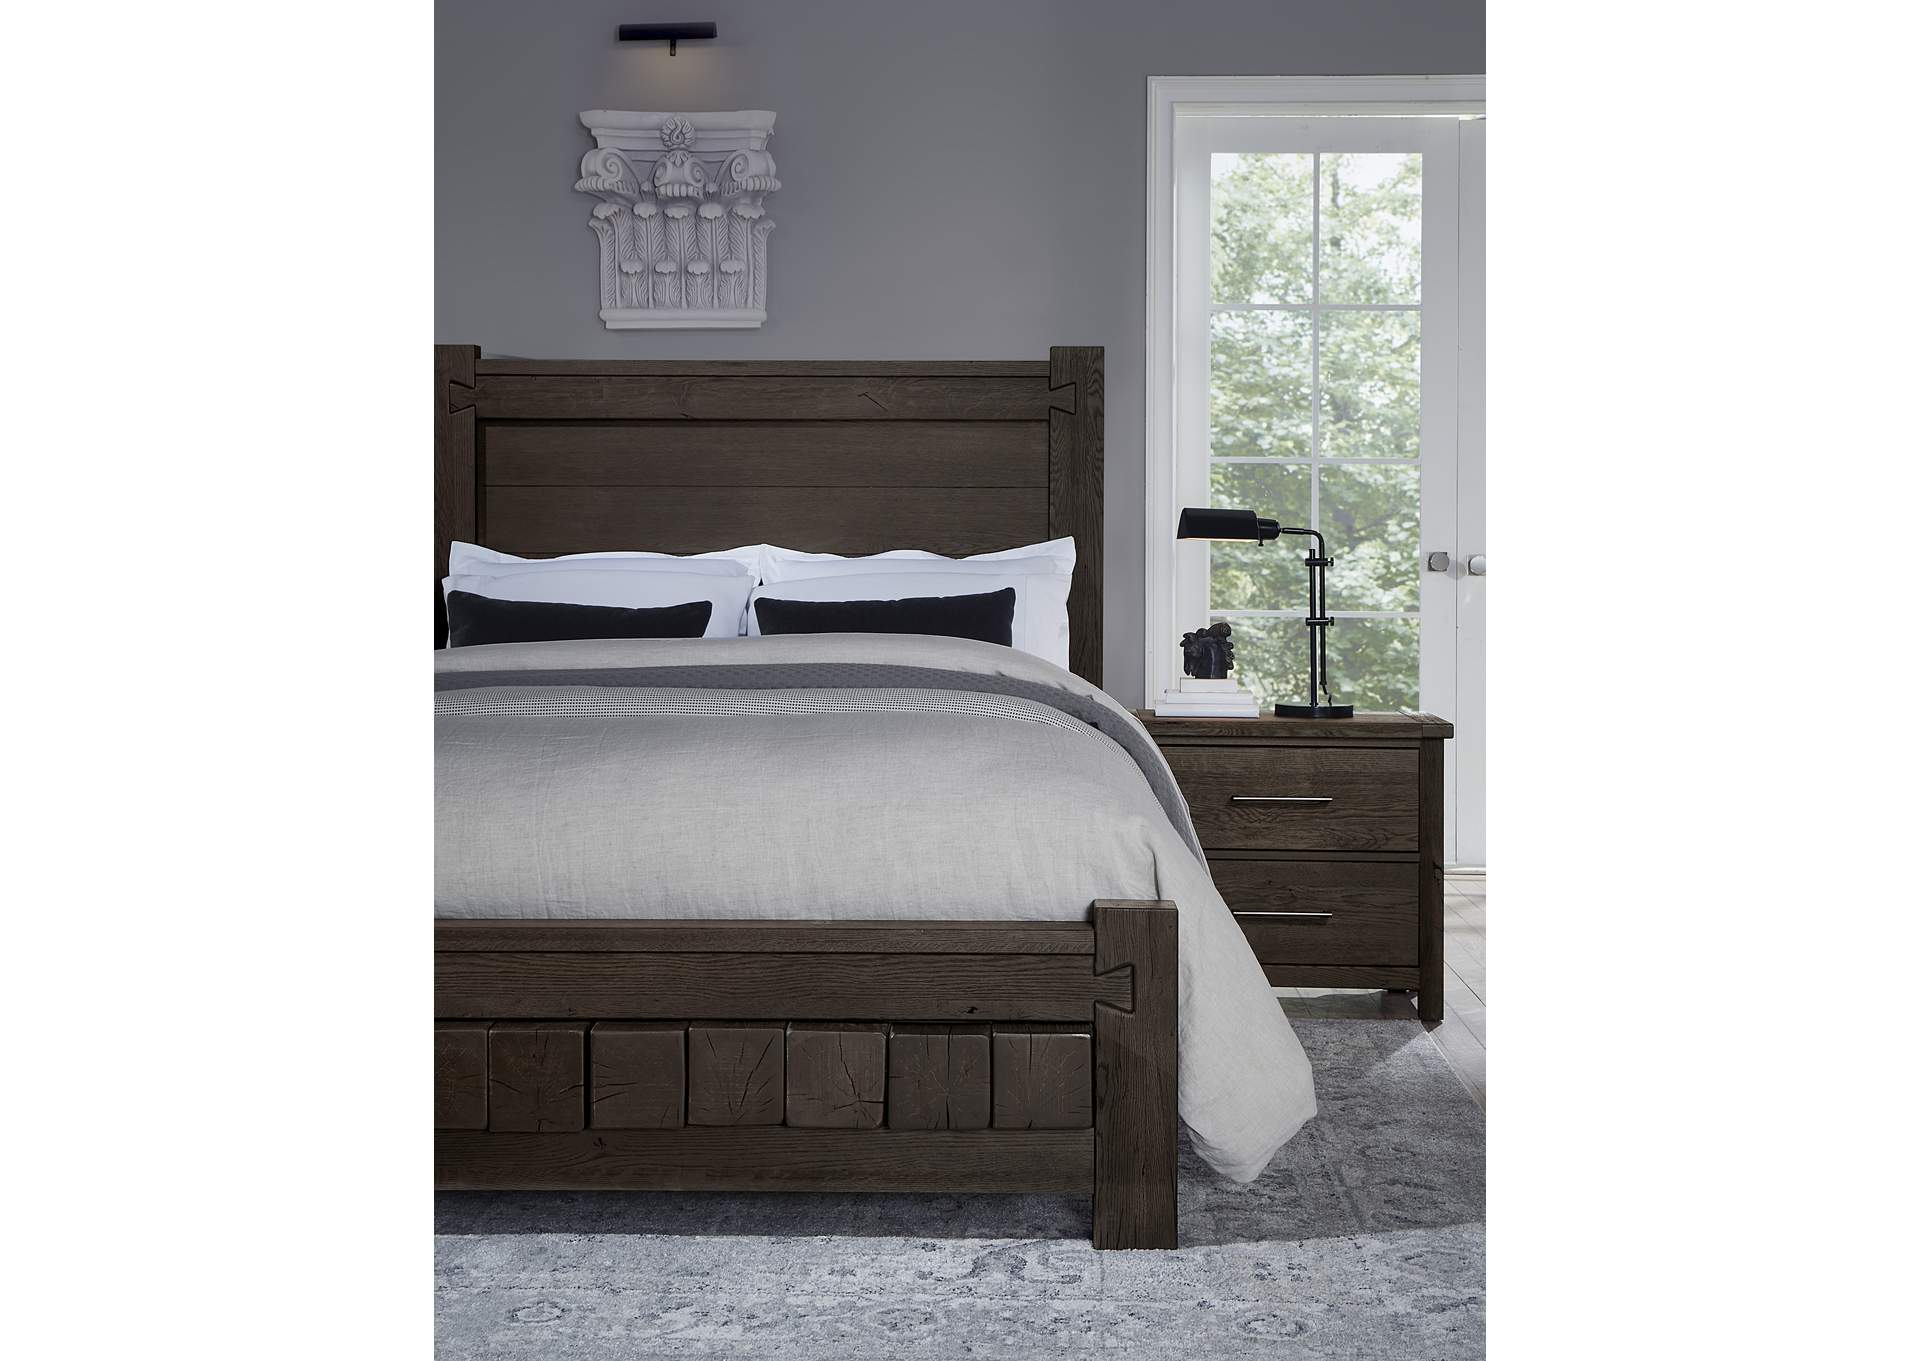 750 - Dovetail-Java Cal King Poster Bed With Poster Fb,Vaughan-Bassett